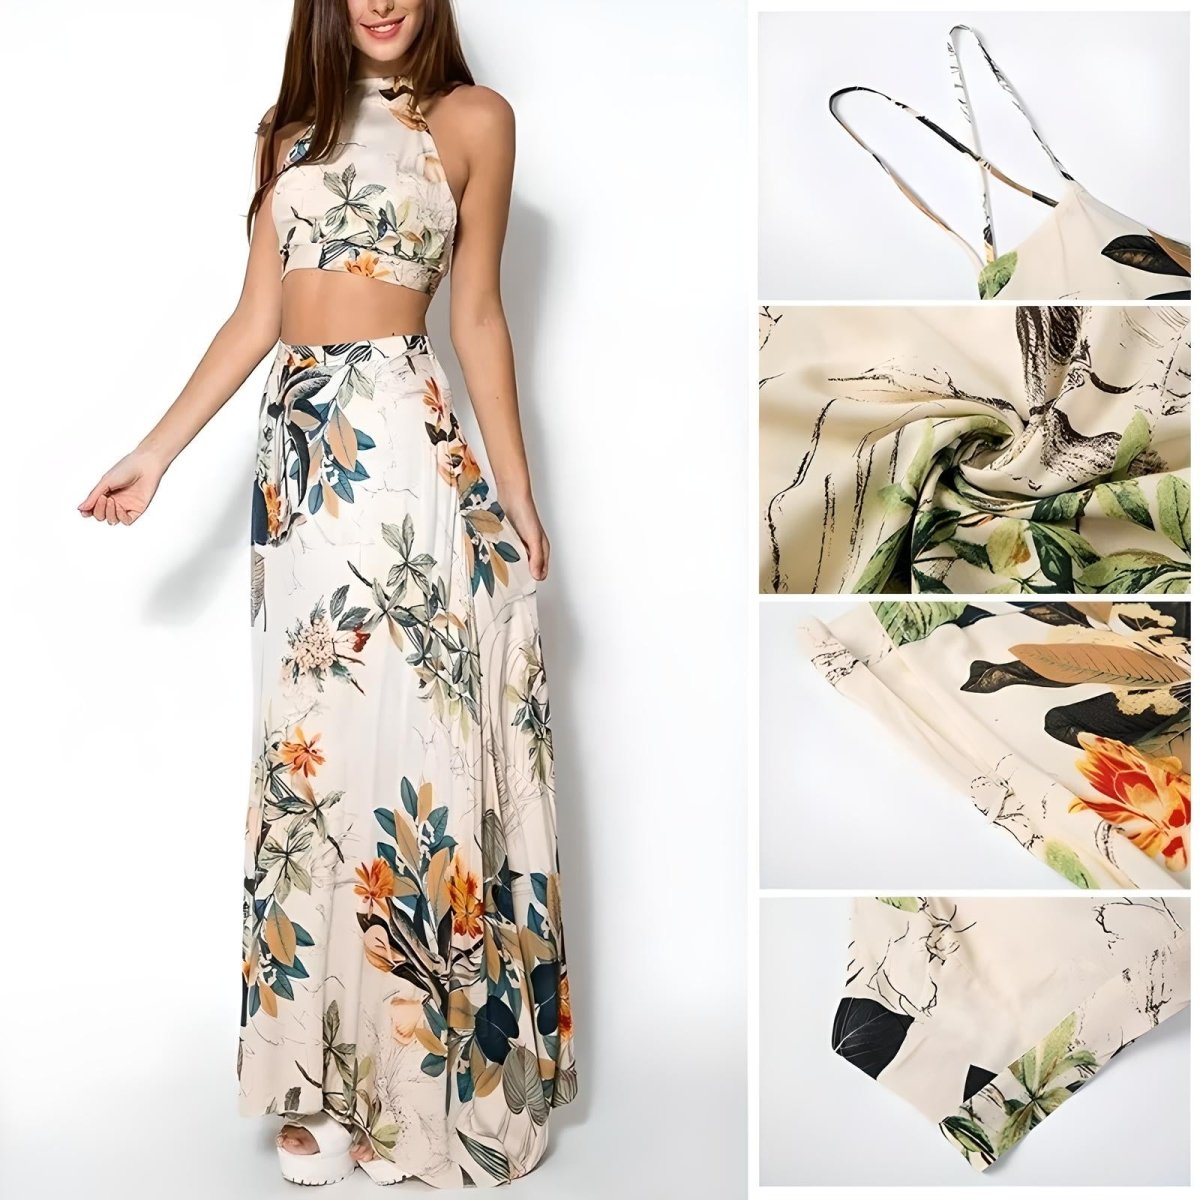 The image is showcasing a Women's Summer Boho Maxi Dress Two - Piece Outfit Set Backless Camisole Beach Dress Bohemian Style Halter Bandage Sundress at Mommy & Lino's Closet